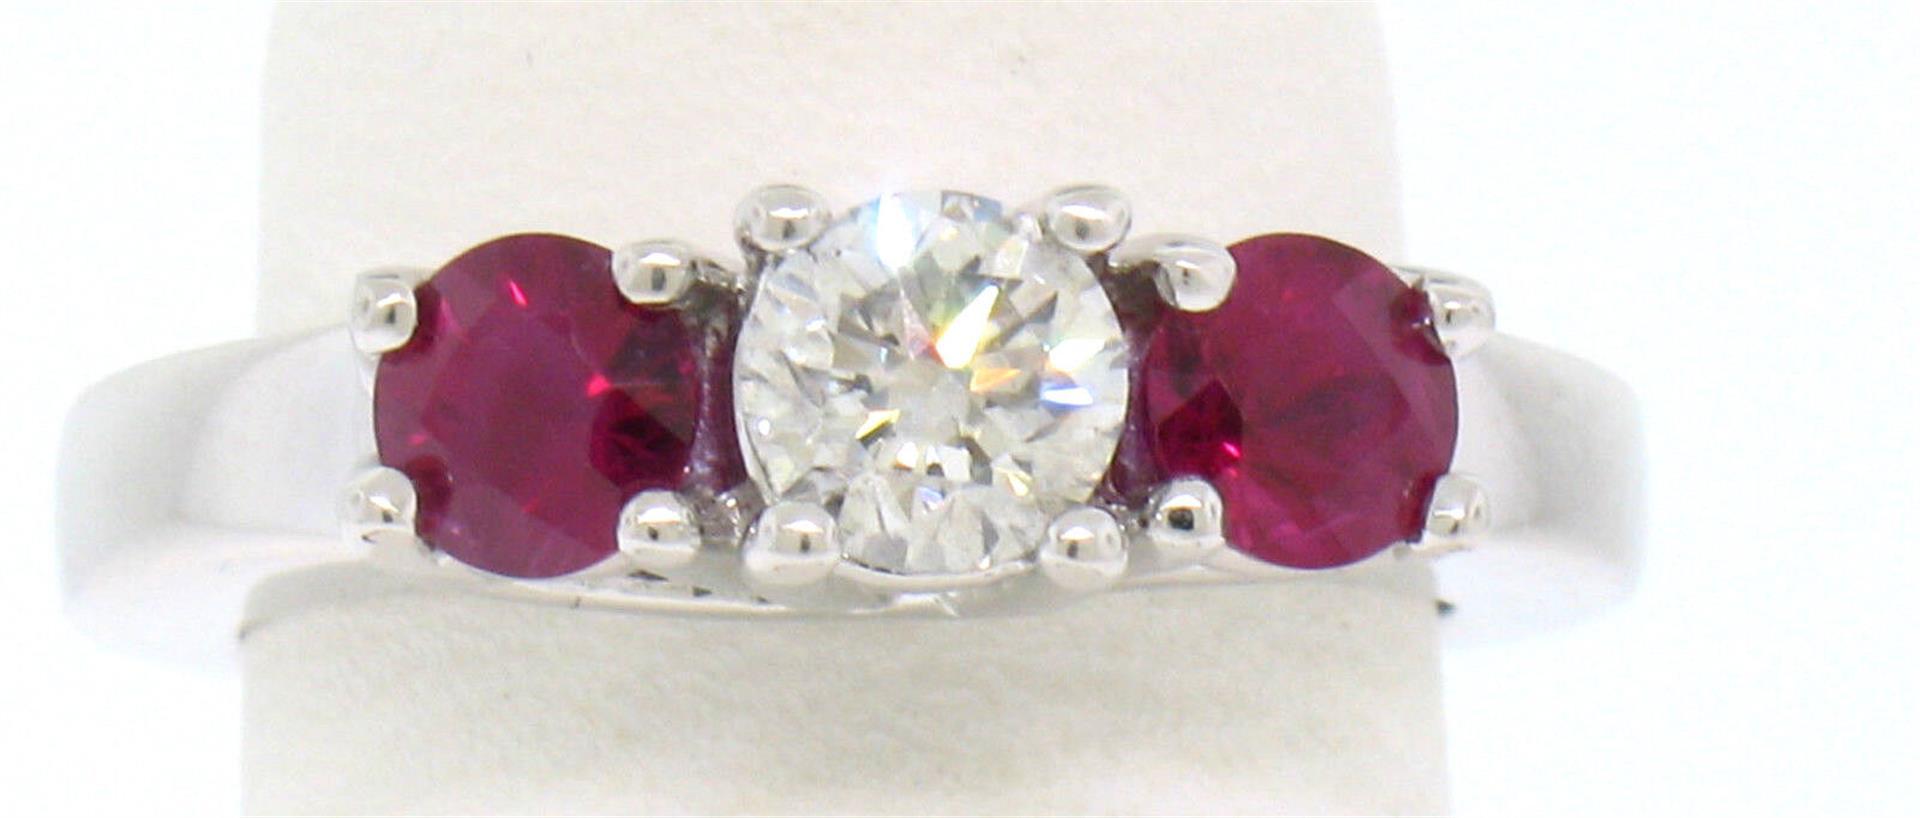 14k White Gold 3 Stone Engagement Ring w/ Ctr Round Diamond & 2 Blood Red Rubies